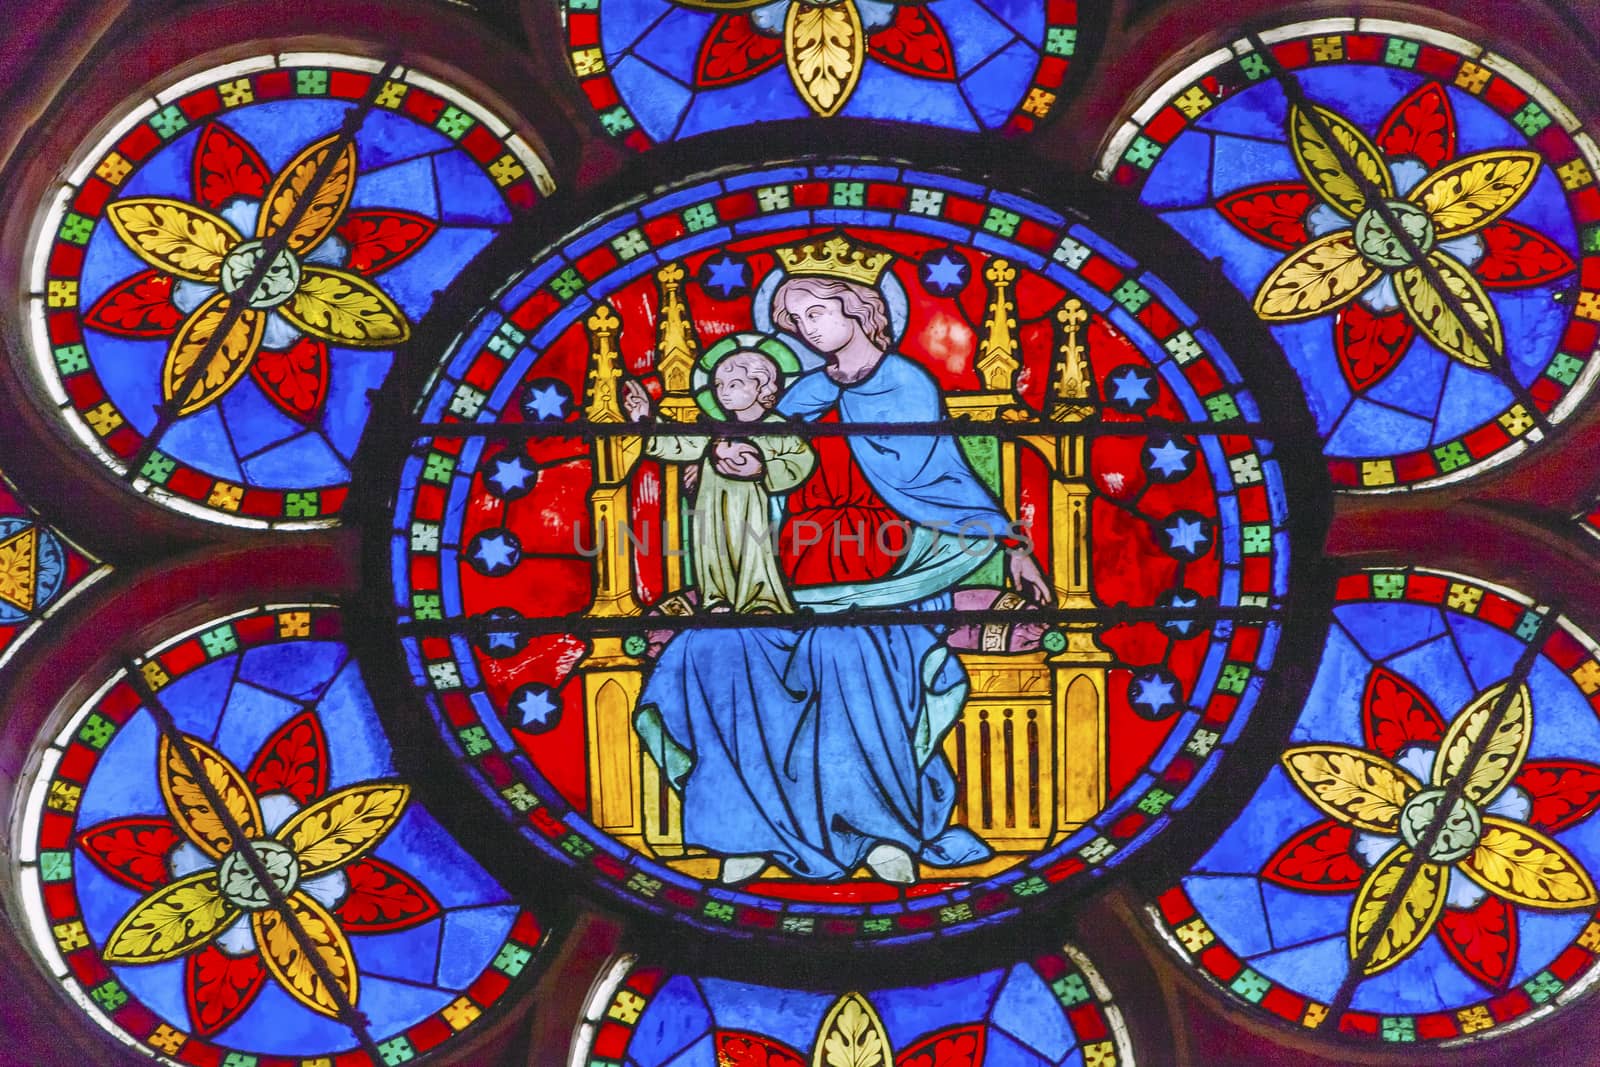 Virgin Mary Jesus Christ Stained Glass Notre Dame Cathedral Paris France.  Notre Dame was built between 1163 and 1250AD.  